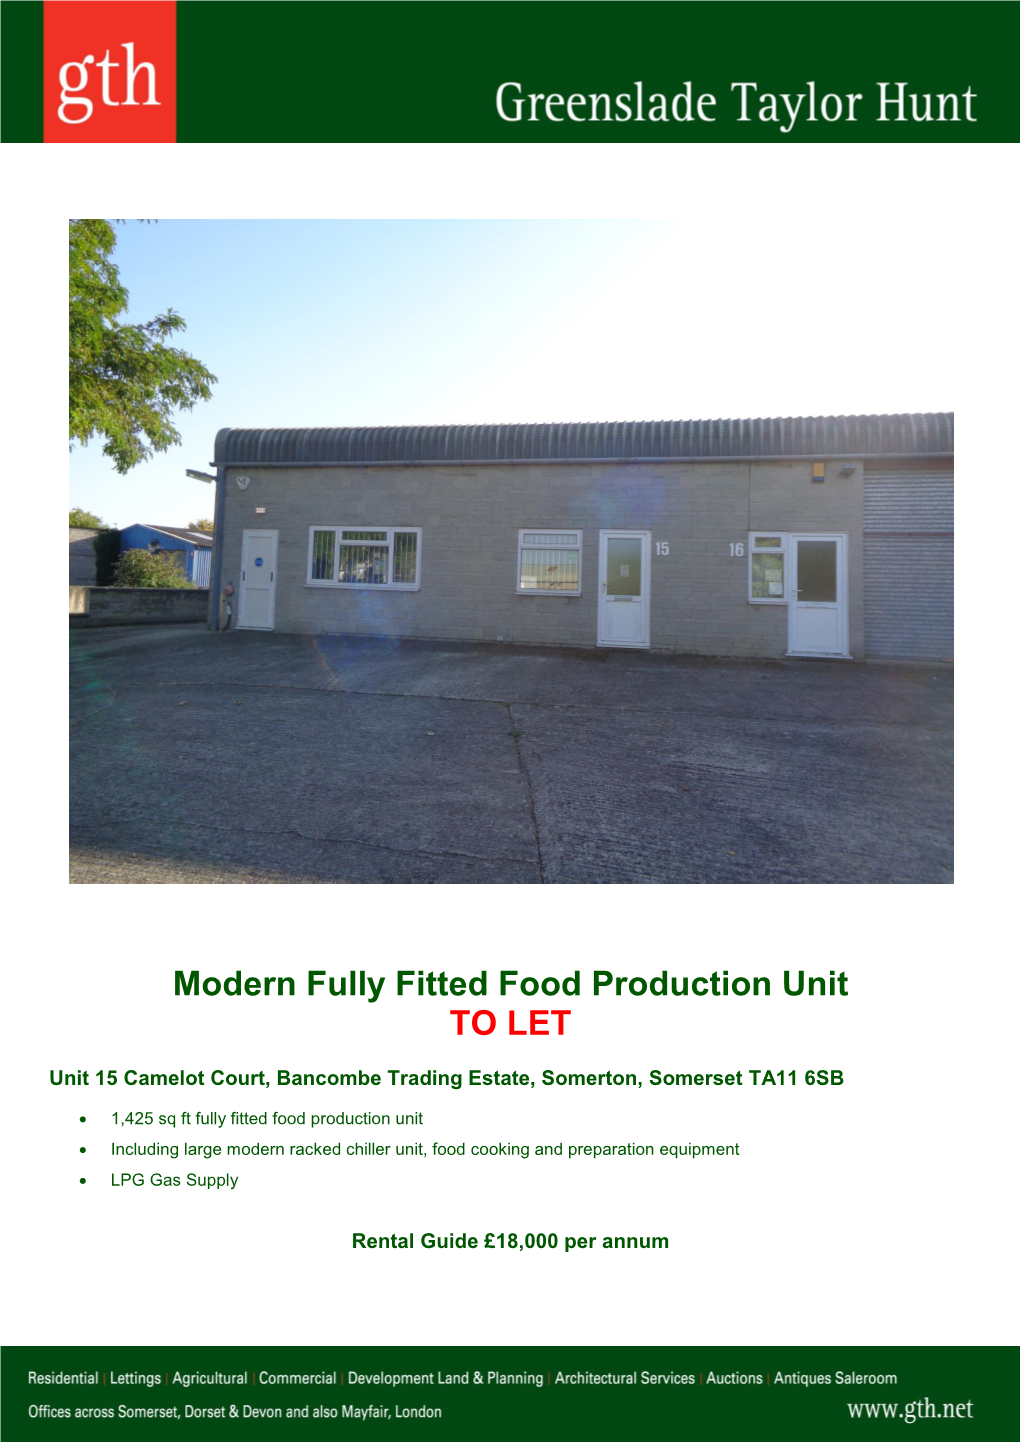 Modern Fully Fitted Food Production Unit to LET